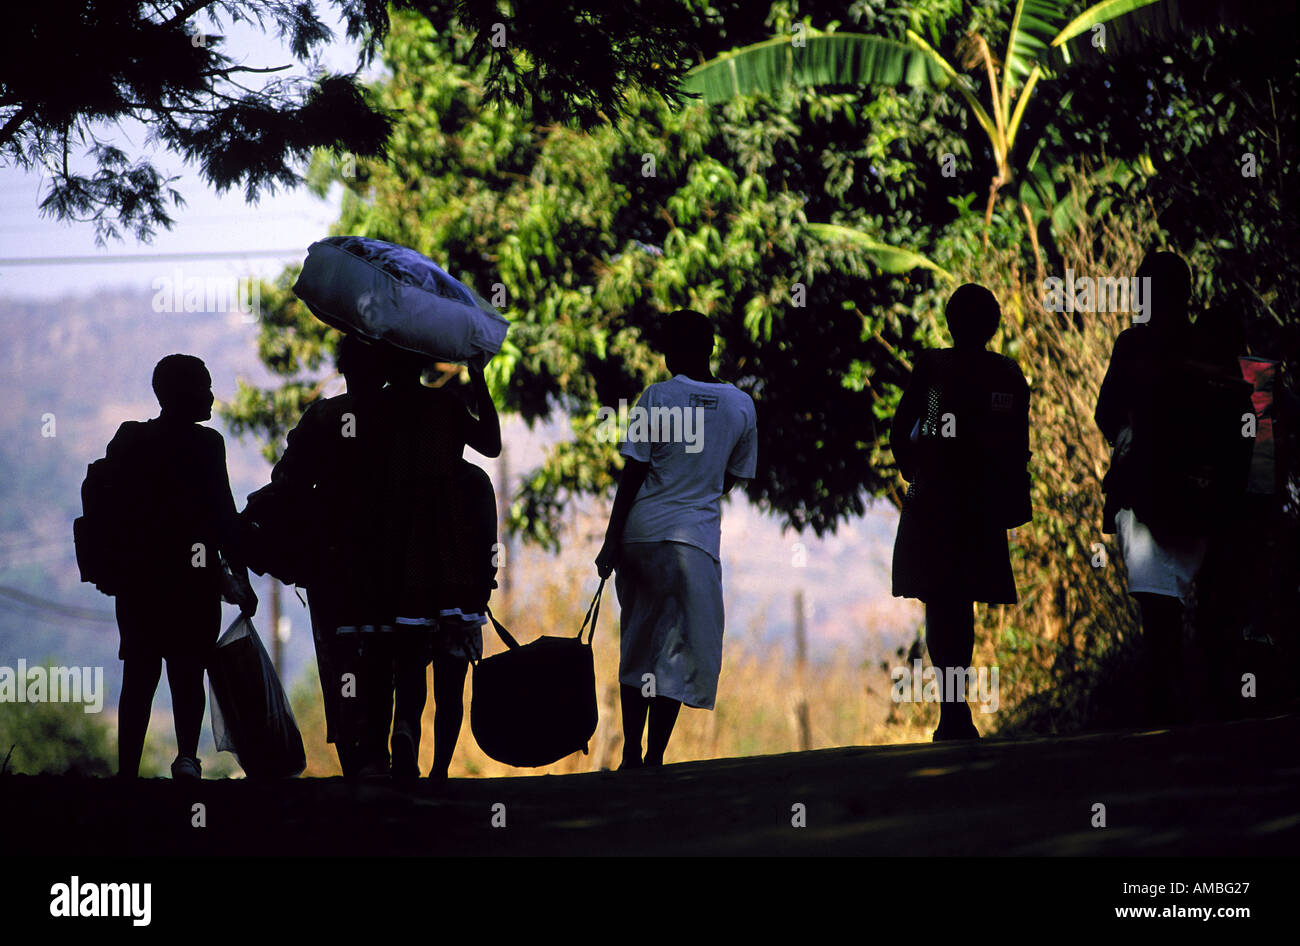 Girls leave on the first day with their bags packed and making their way to Lombamba Stock Photo